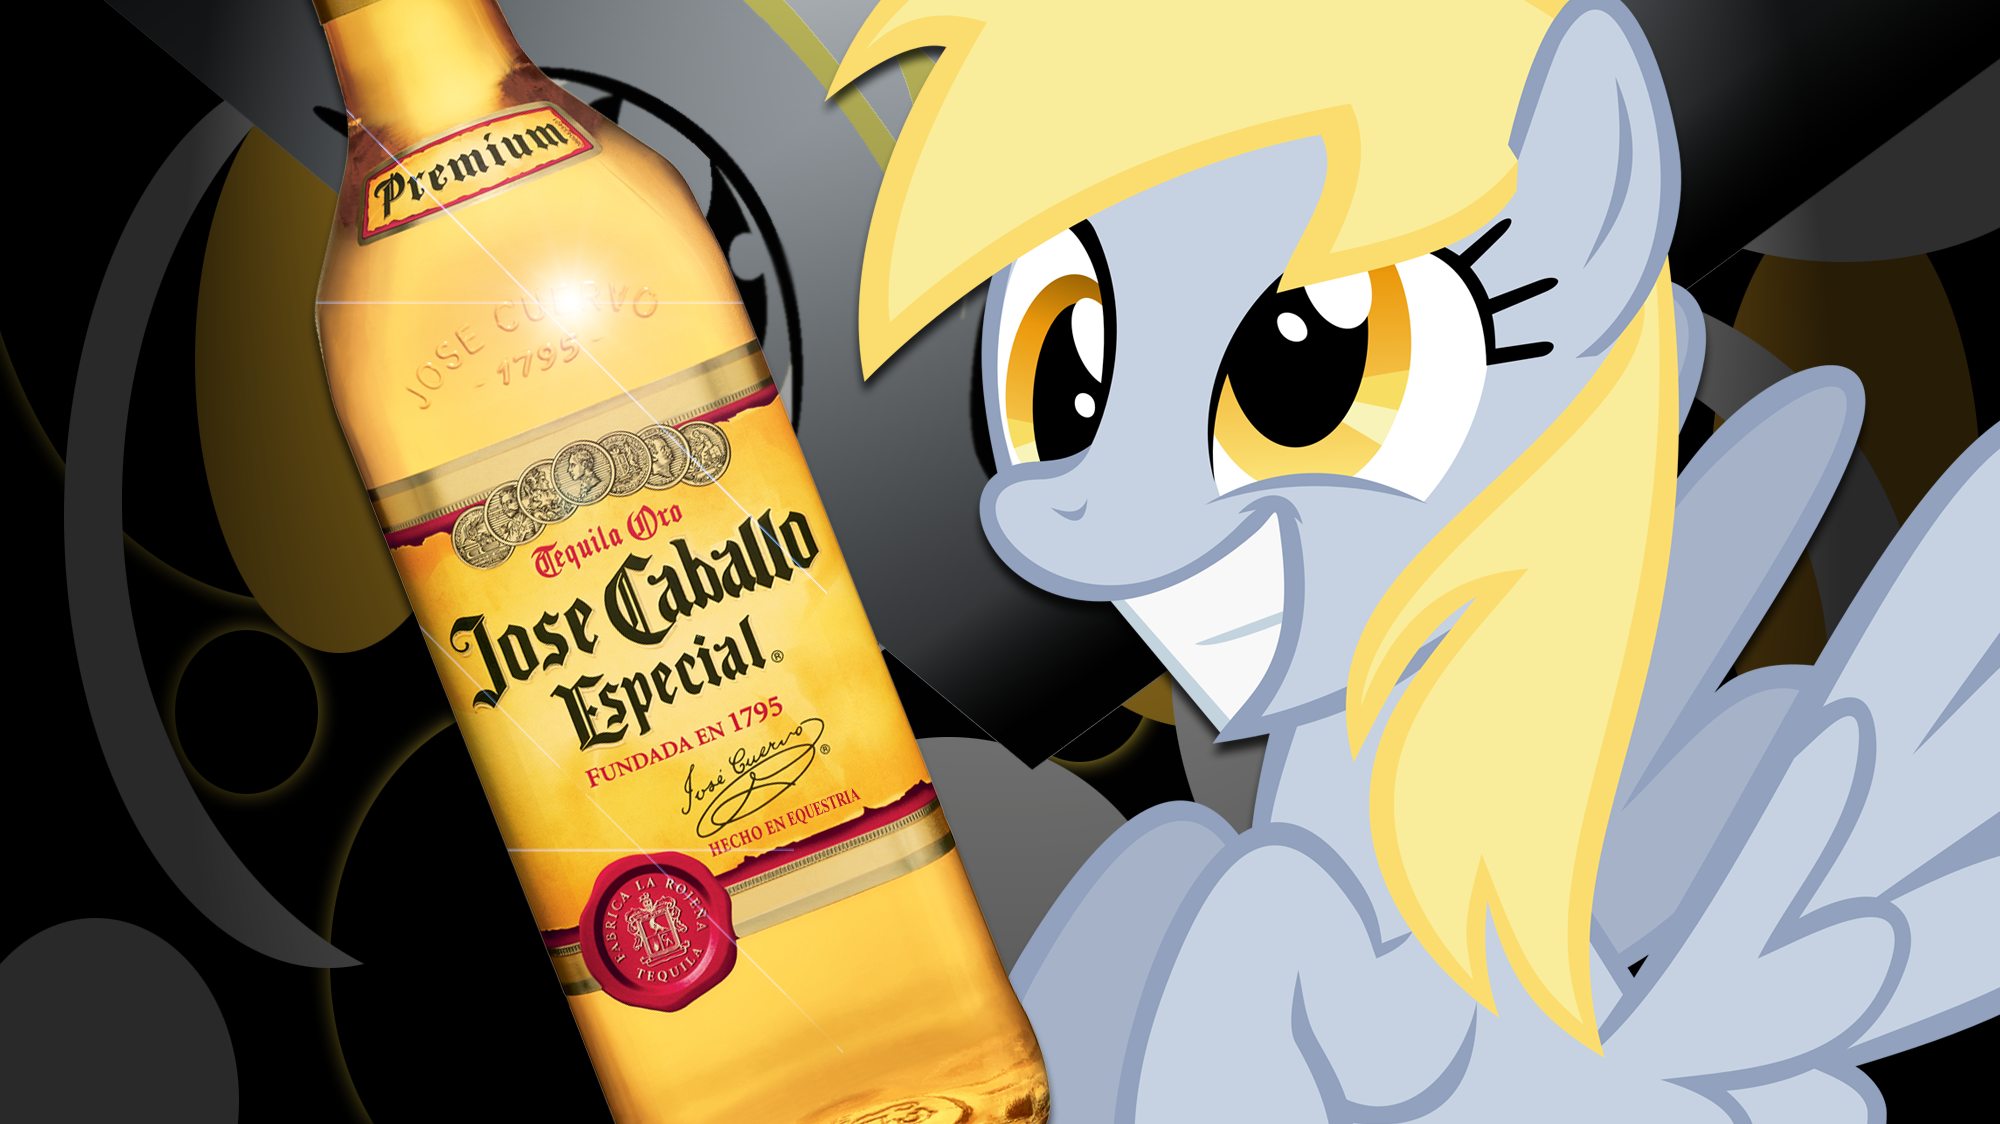 What Do Ponies Drink? - Derpy Hooves by 4Suit and ObtuseLolcat